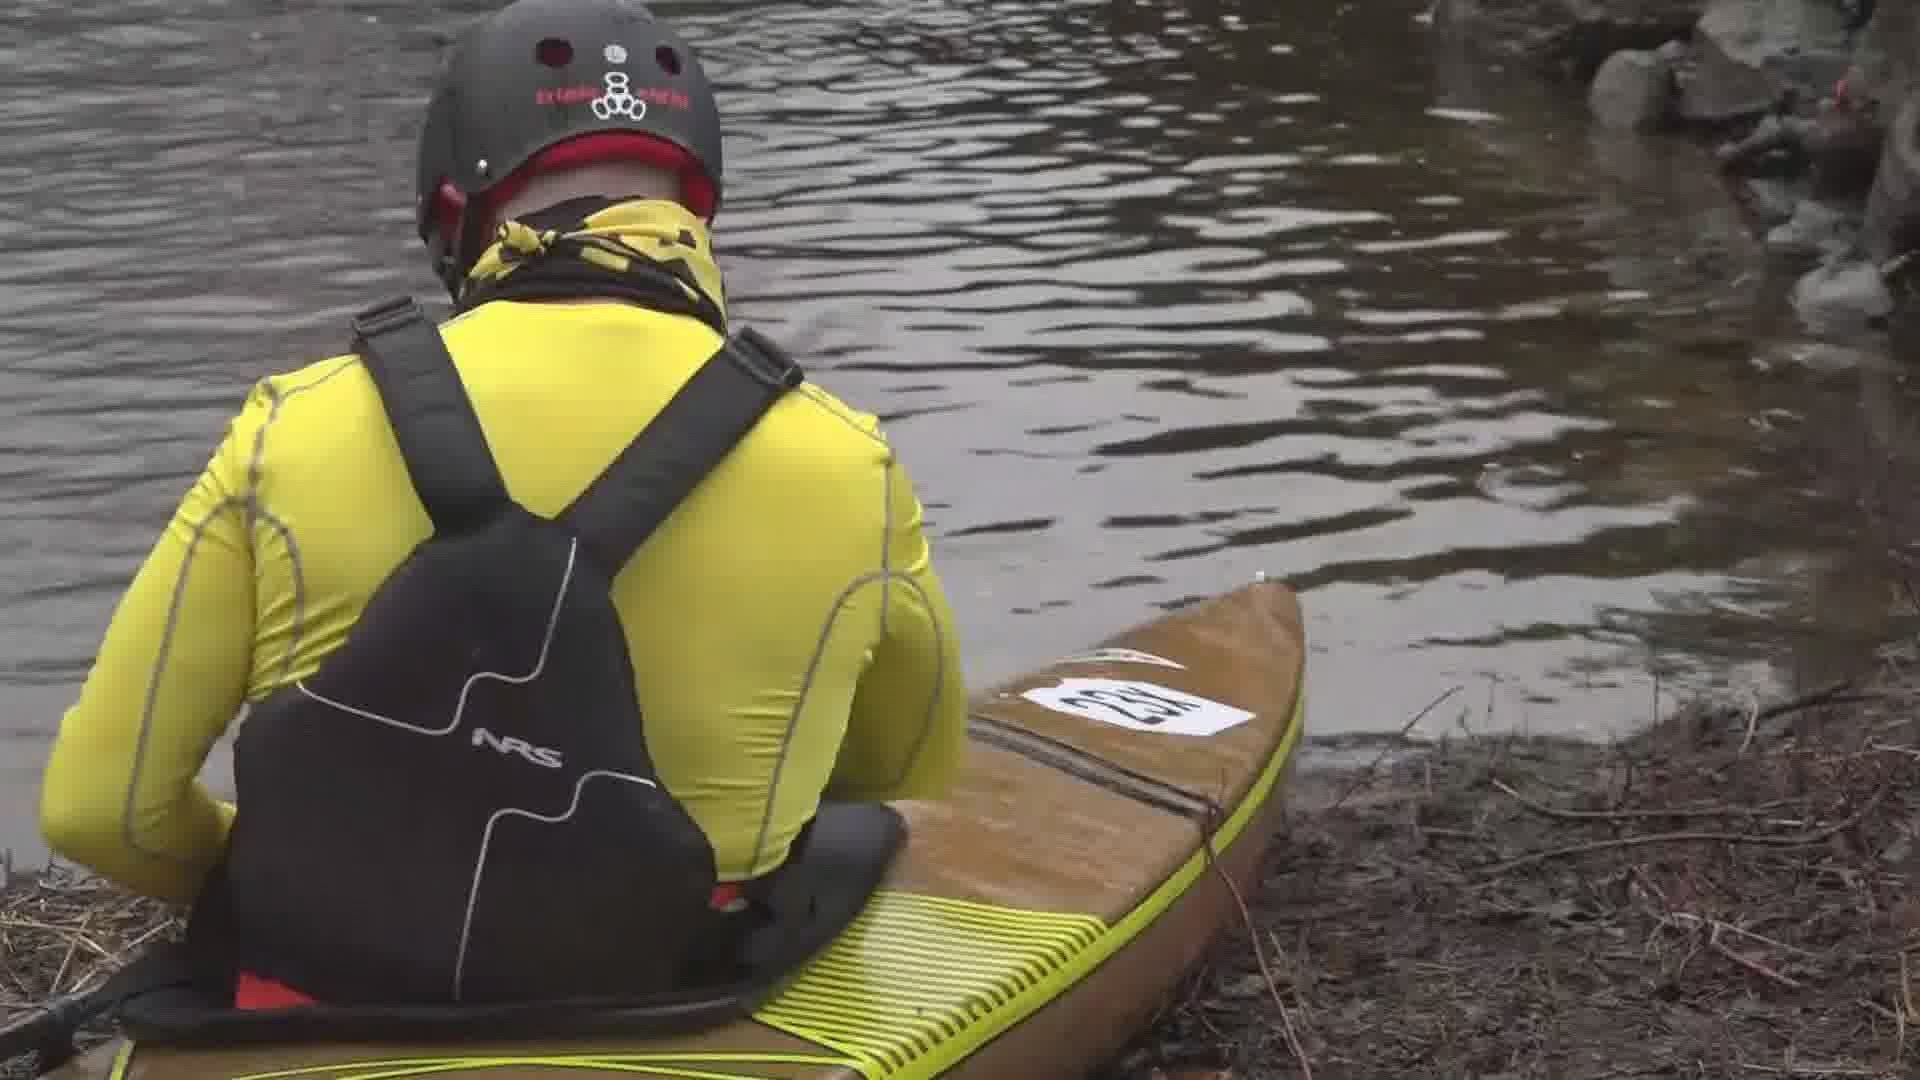 Last year, the pandemic forced the stream canoe race to be cancelled.